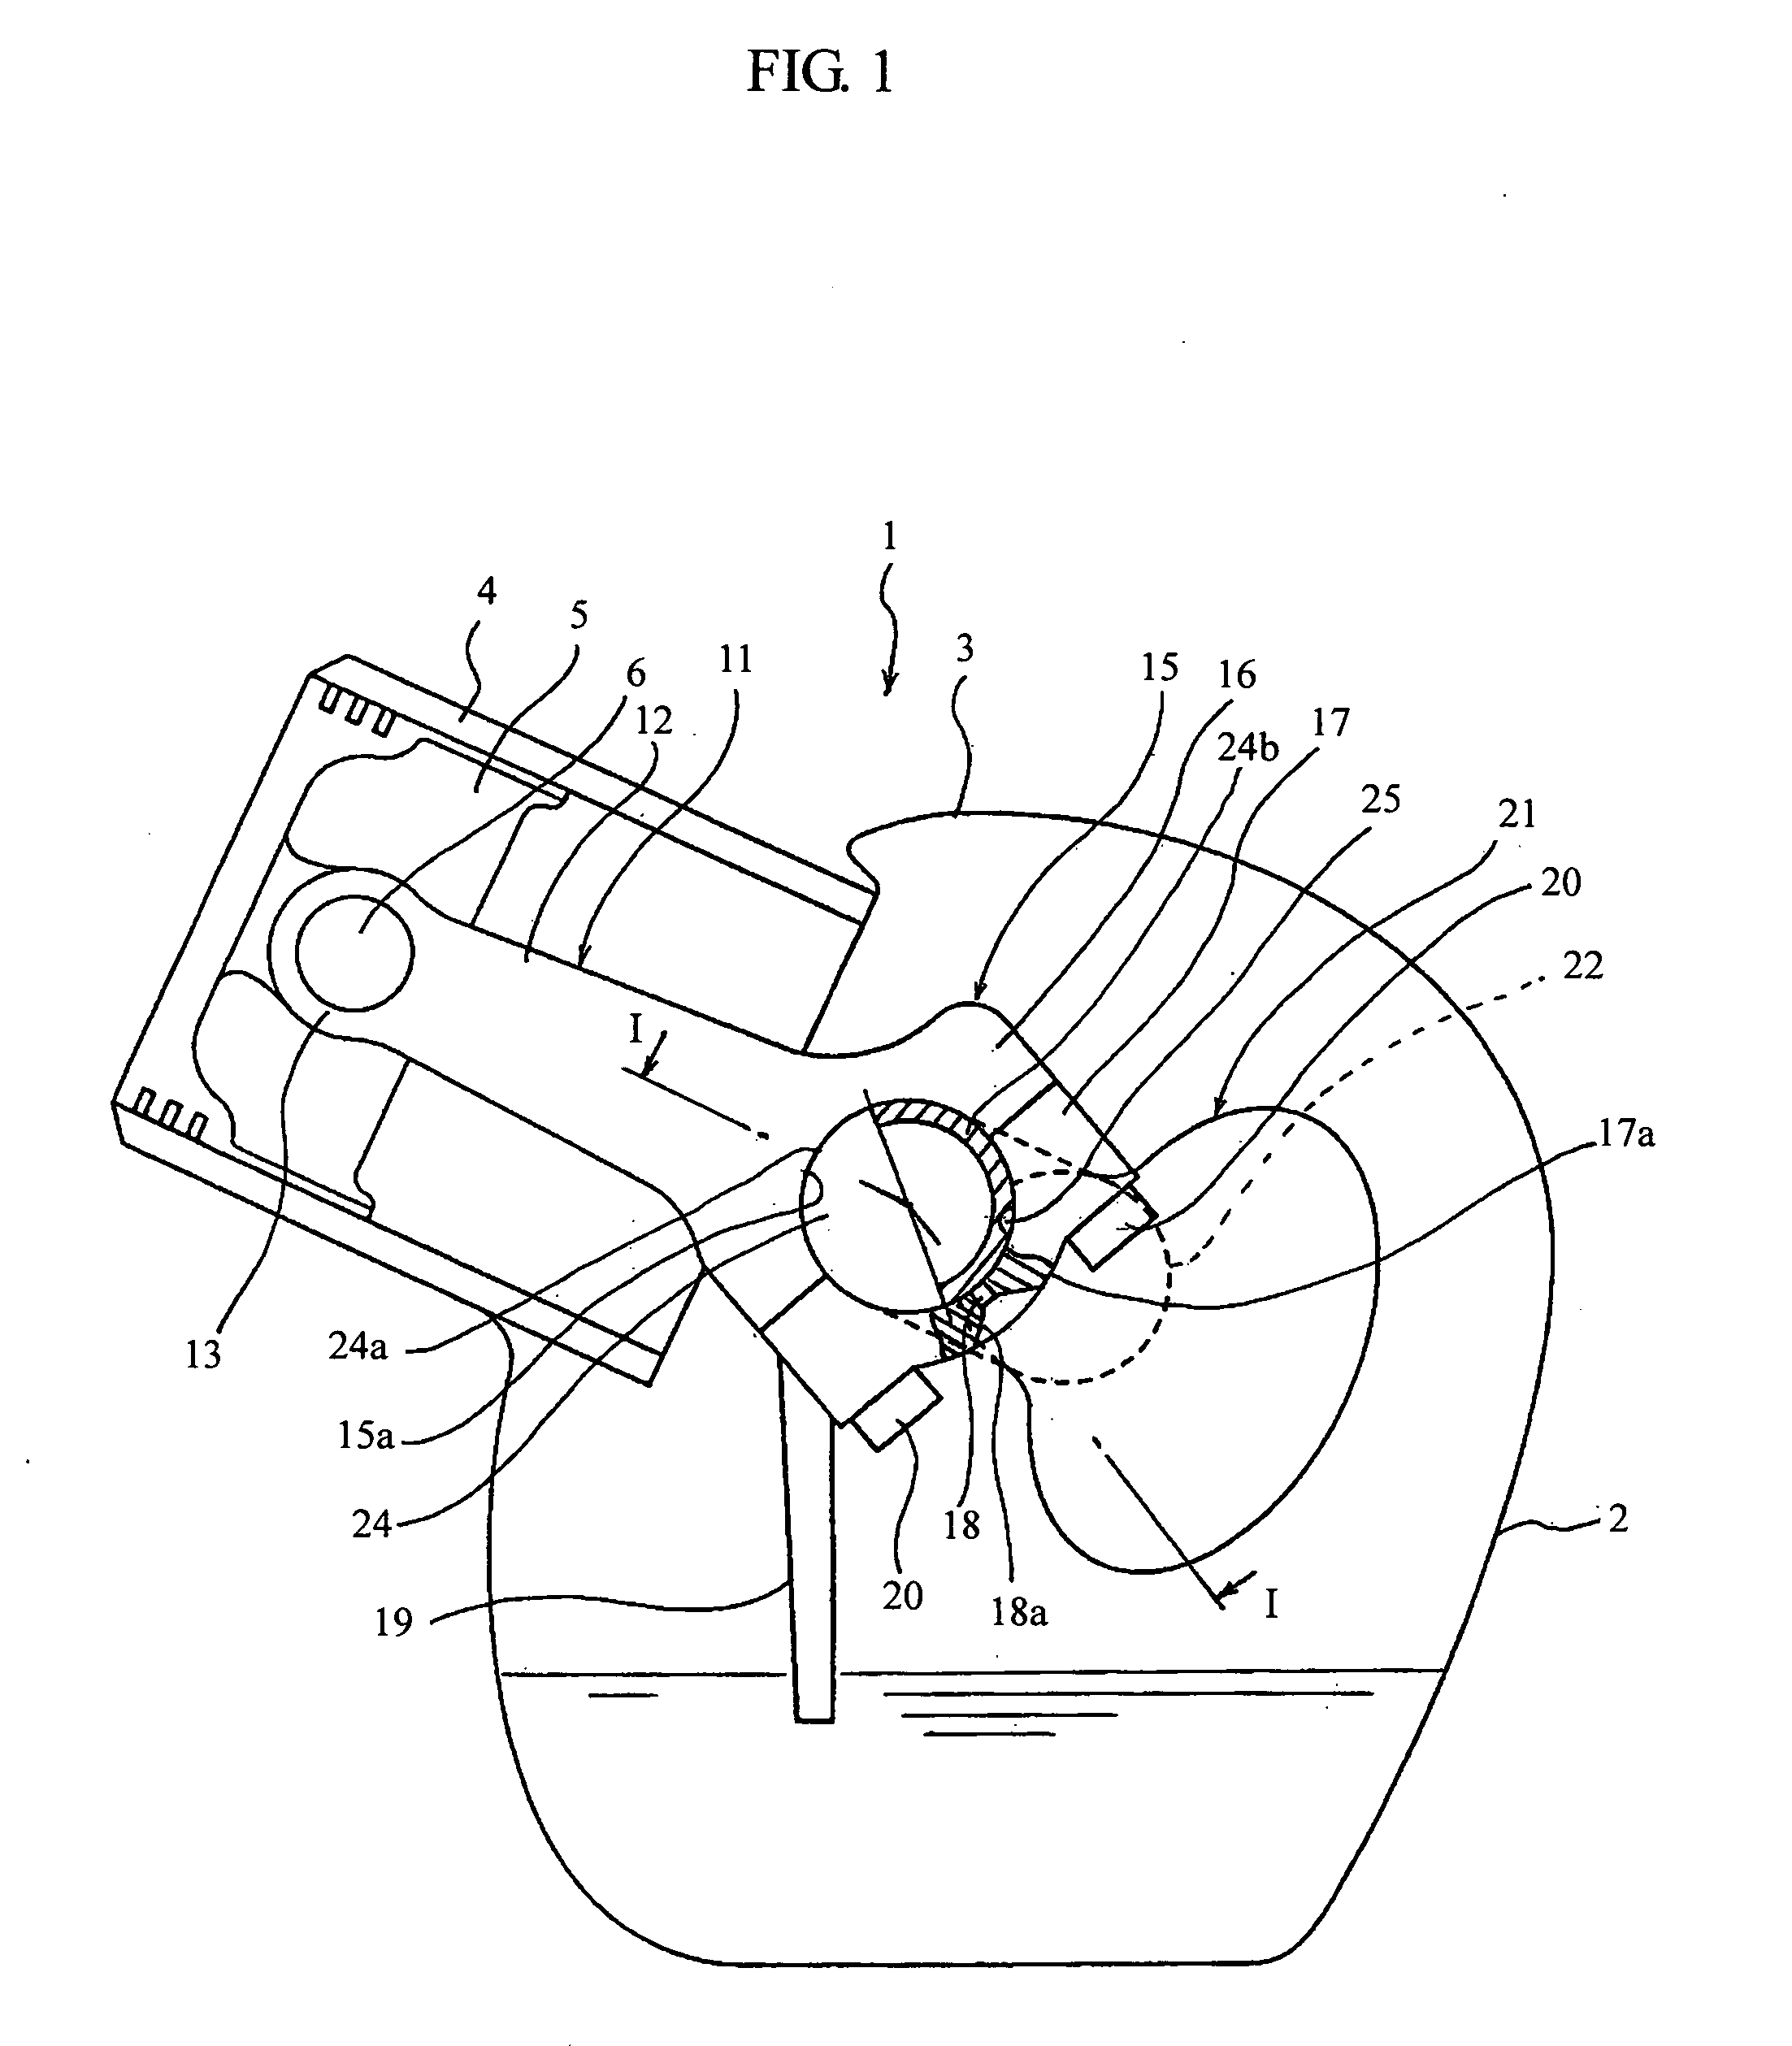 Lubrication structure in engine